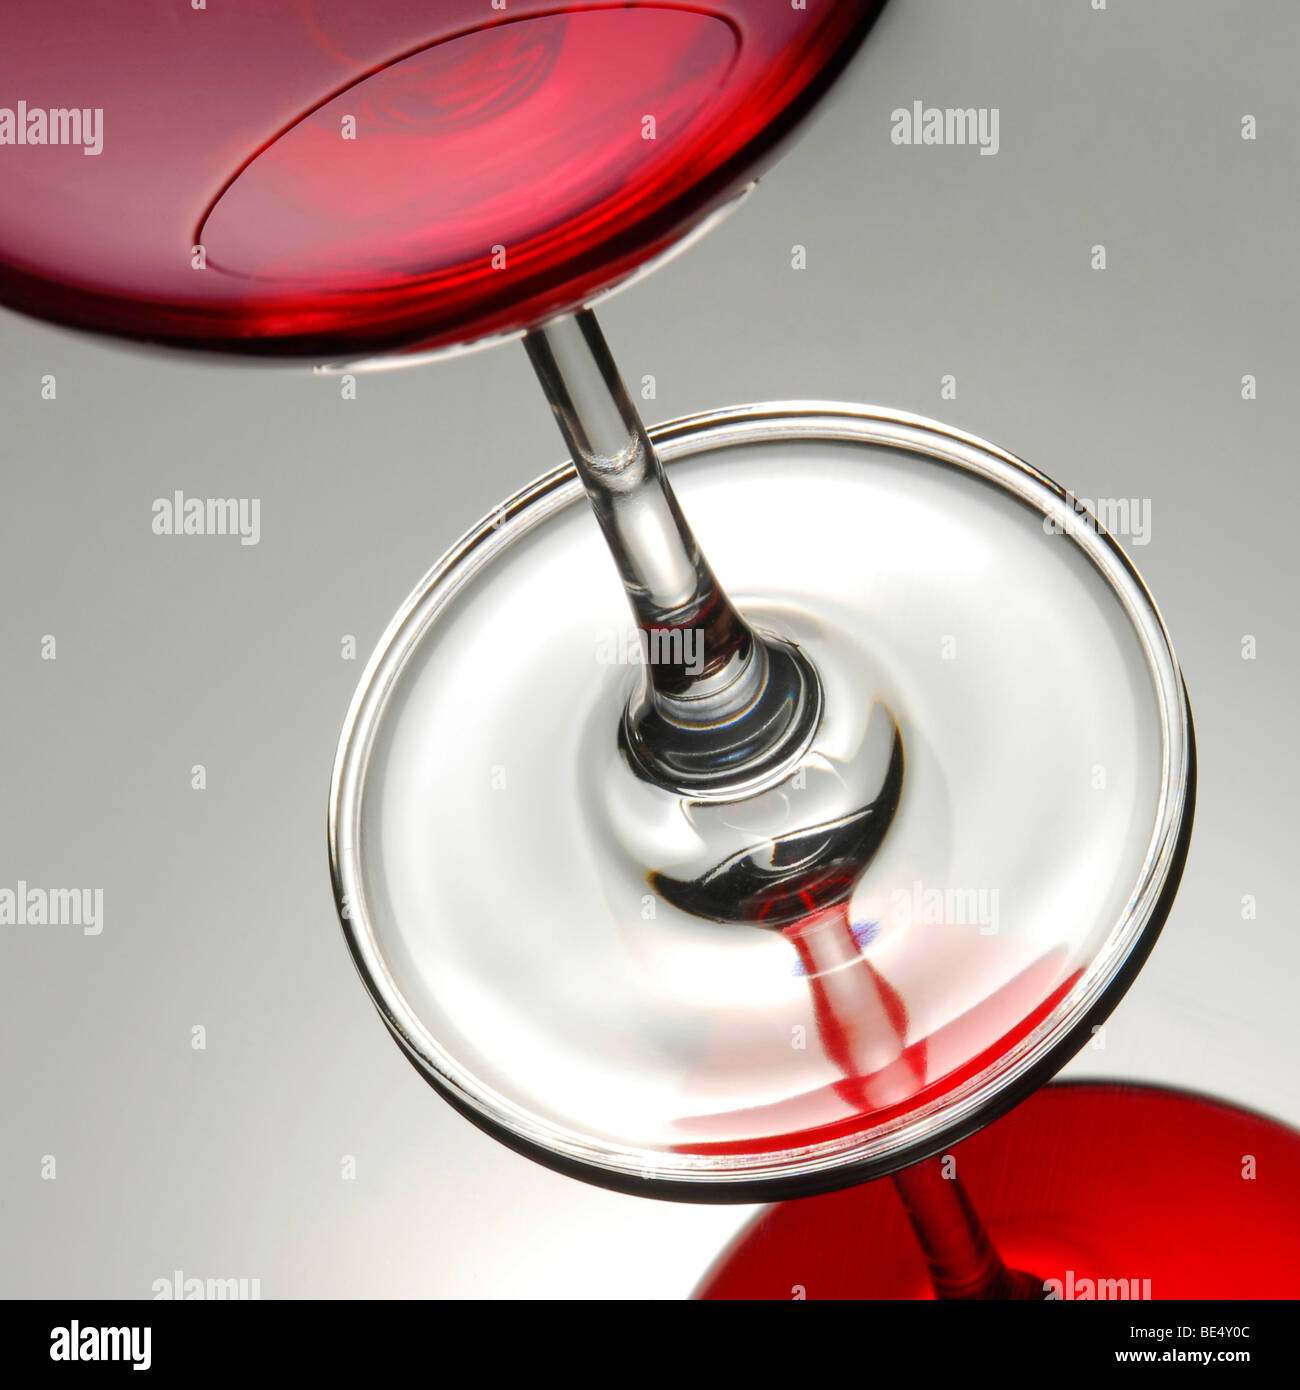 Glass with red wine, Detail Stock Photo